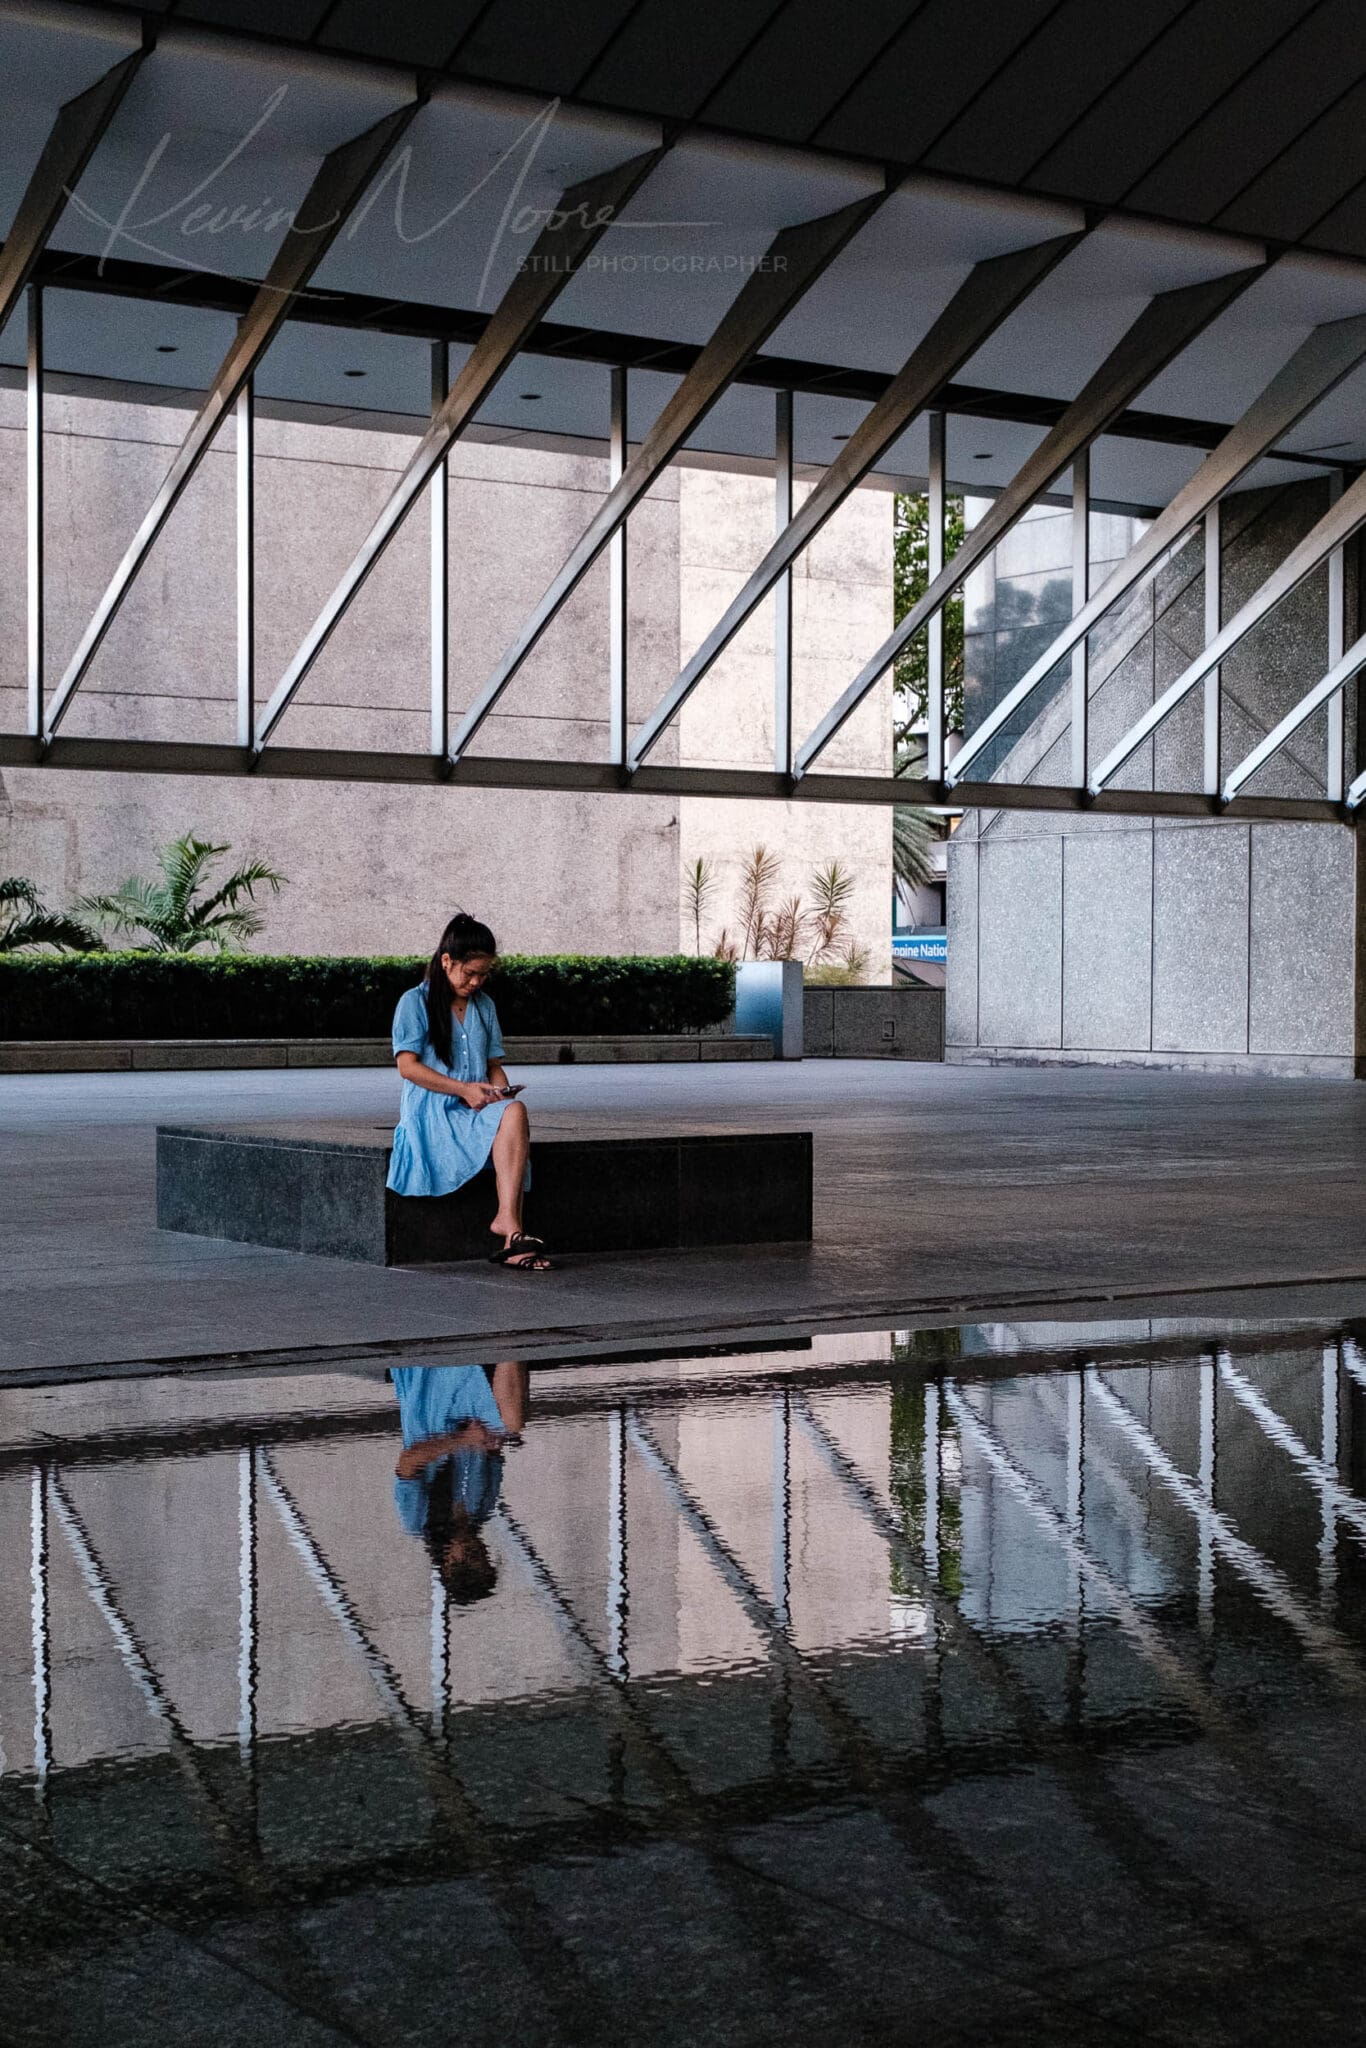 Solitary woman in modern, geometric architecture with reflections on water.